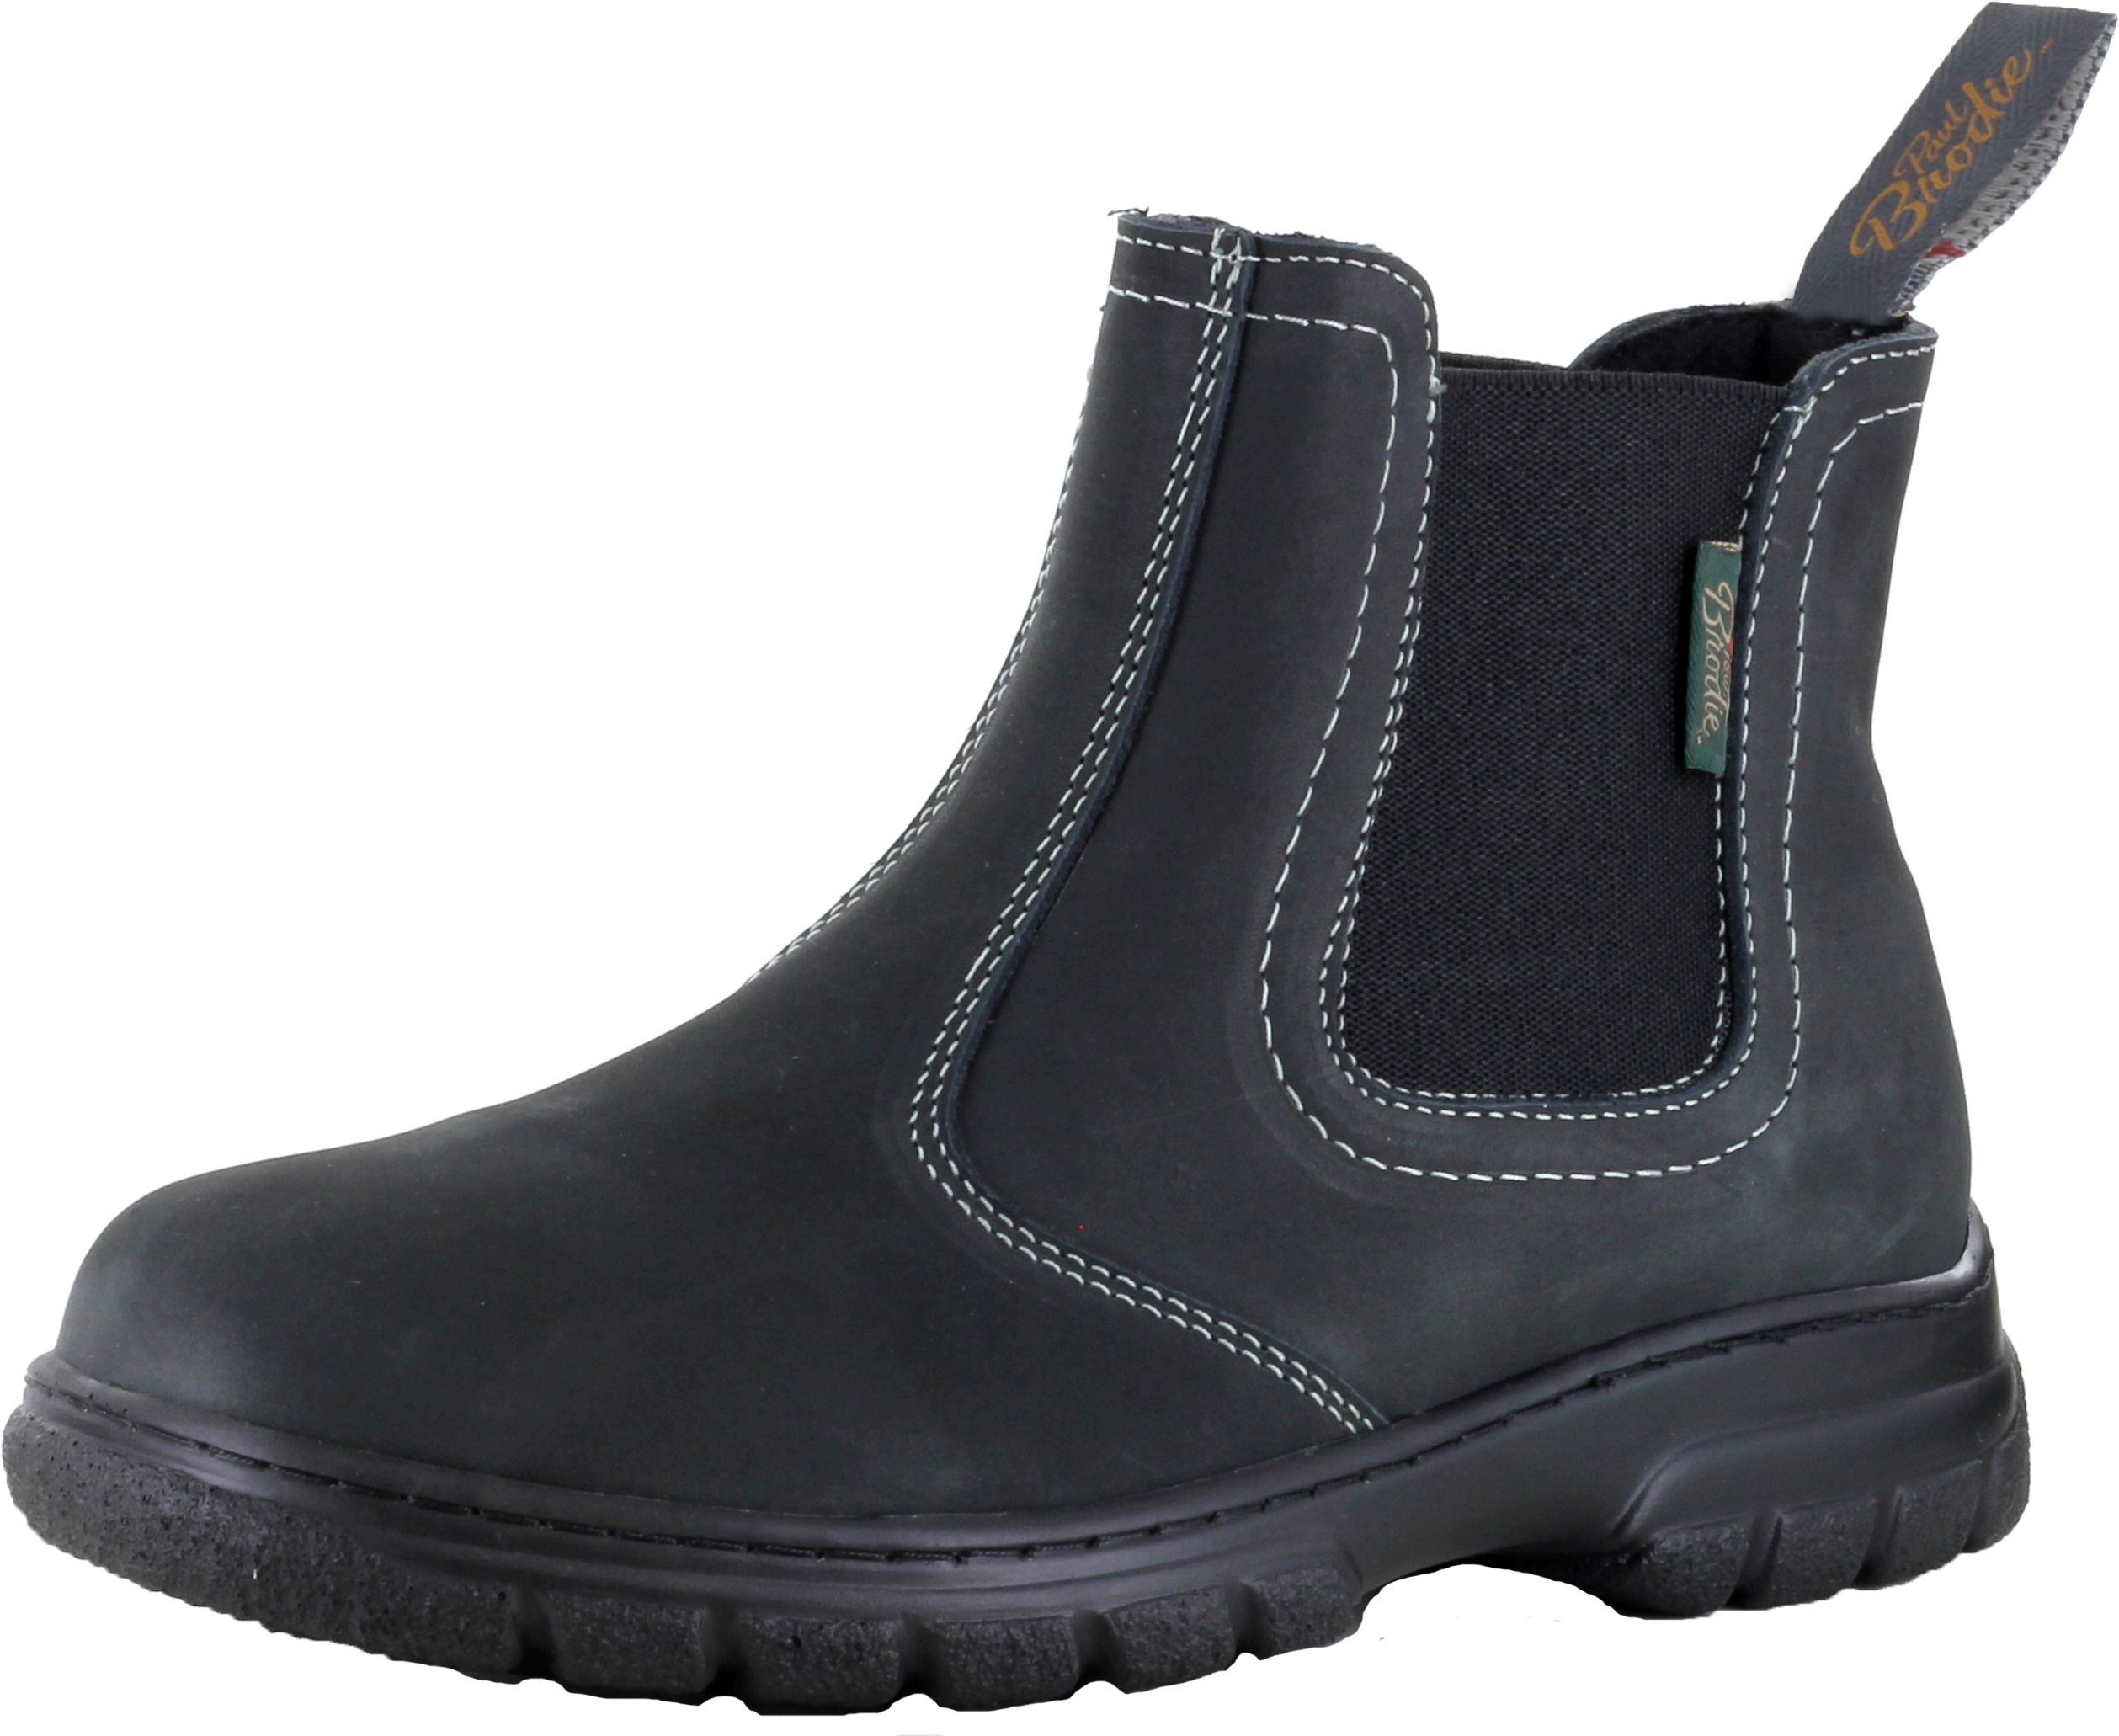 Paul Brodie Double Gore Boots - Charcoal